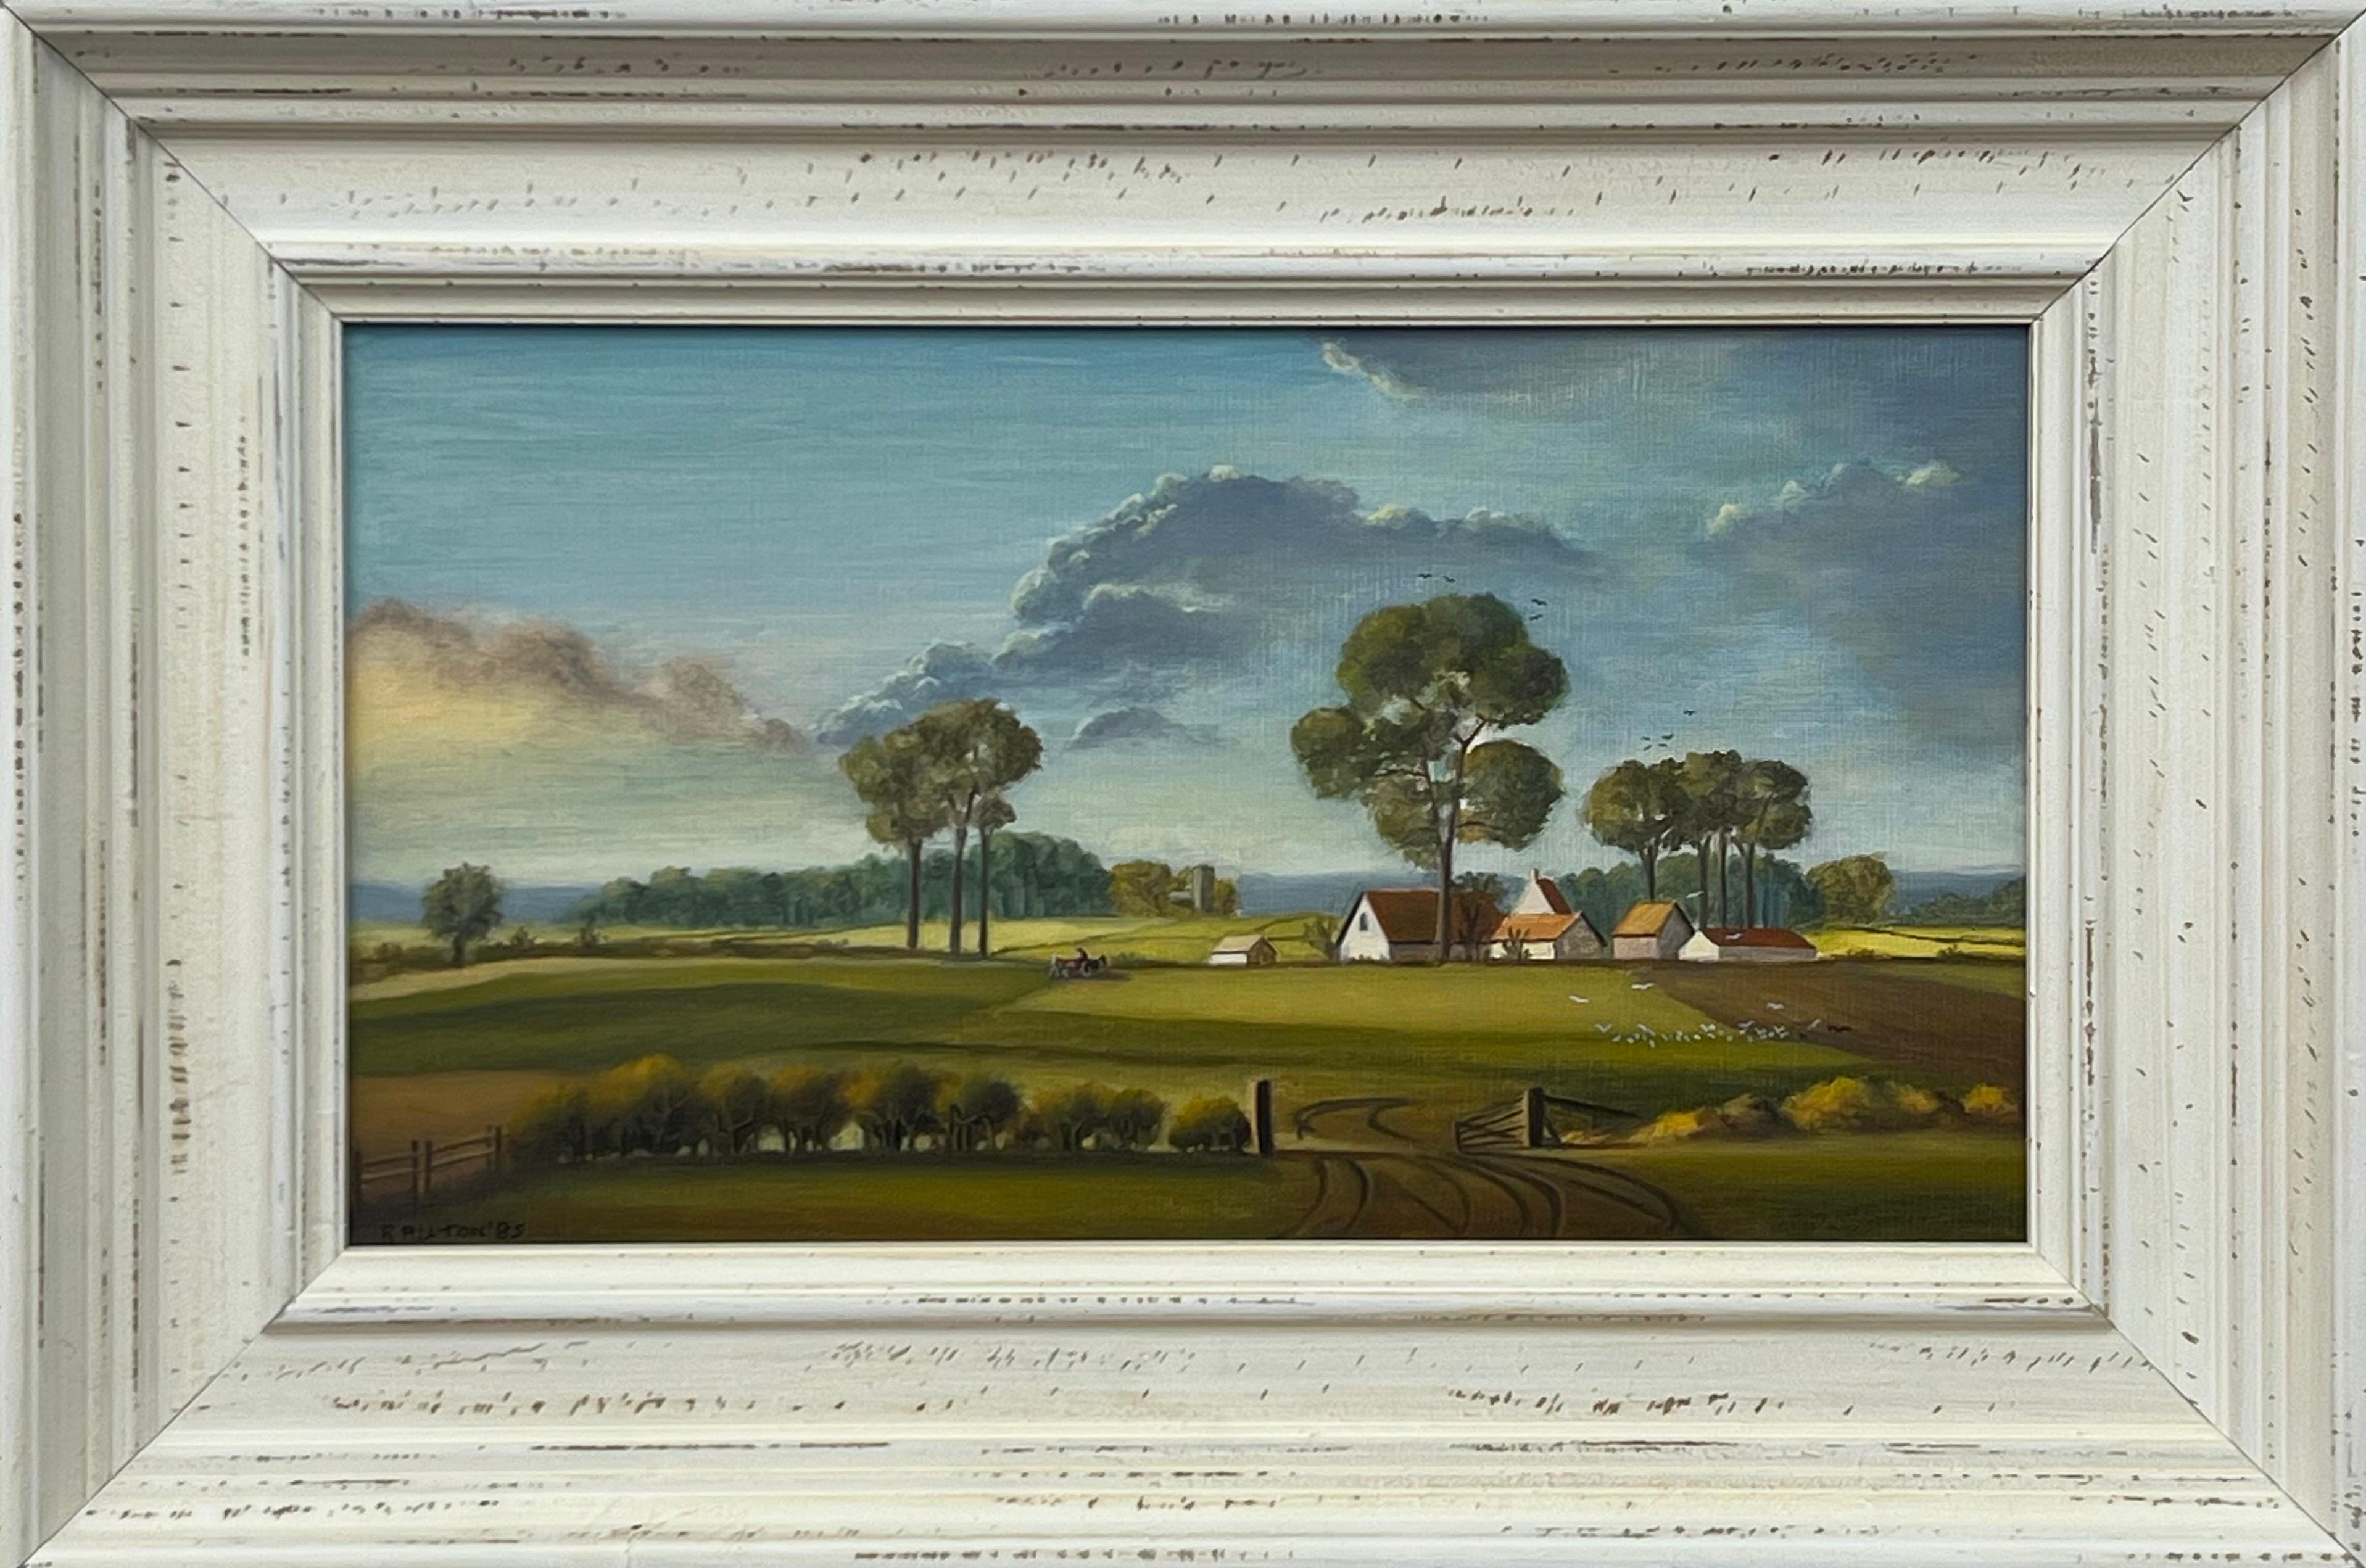 R Auton Figurative Painting - Farm Landscape with Lush Green Fields & Summer Sky in the English Countryside